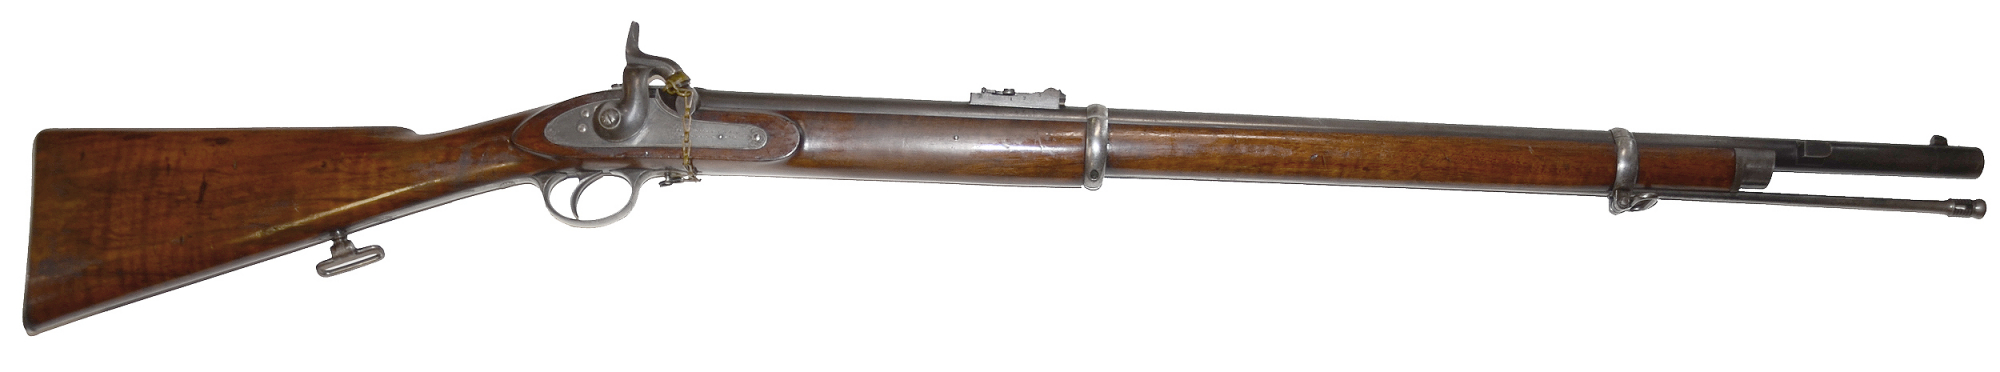 Snider Enfield Short Rifle unit marked